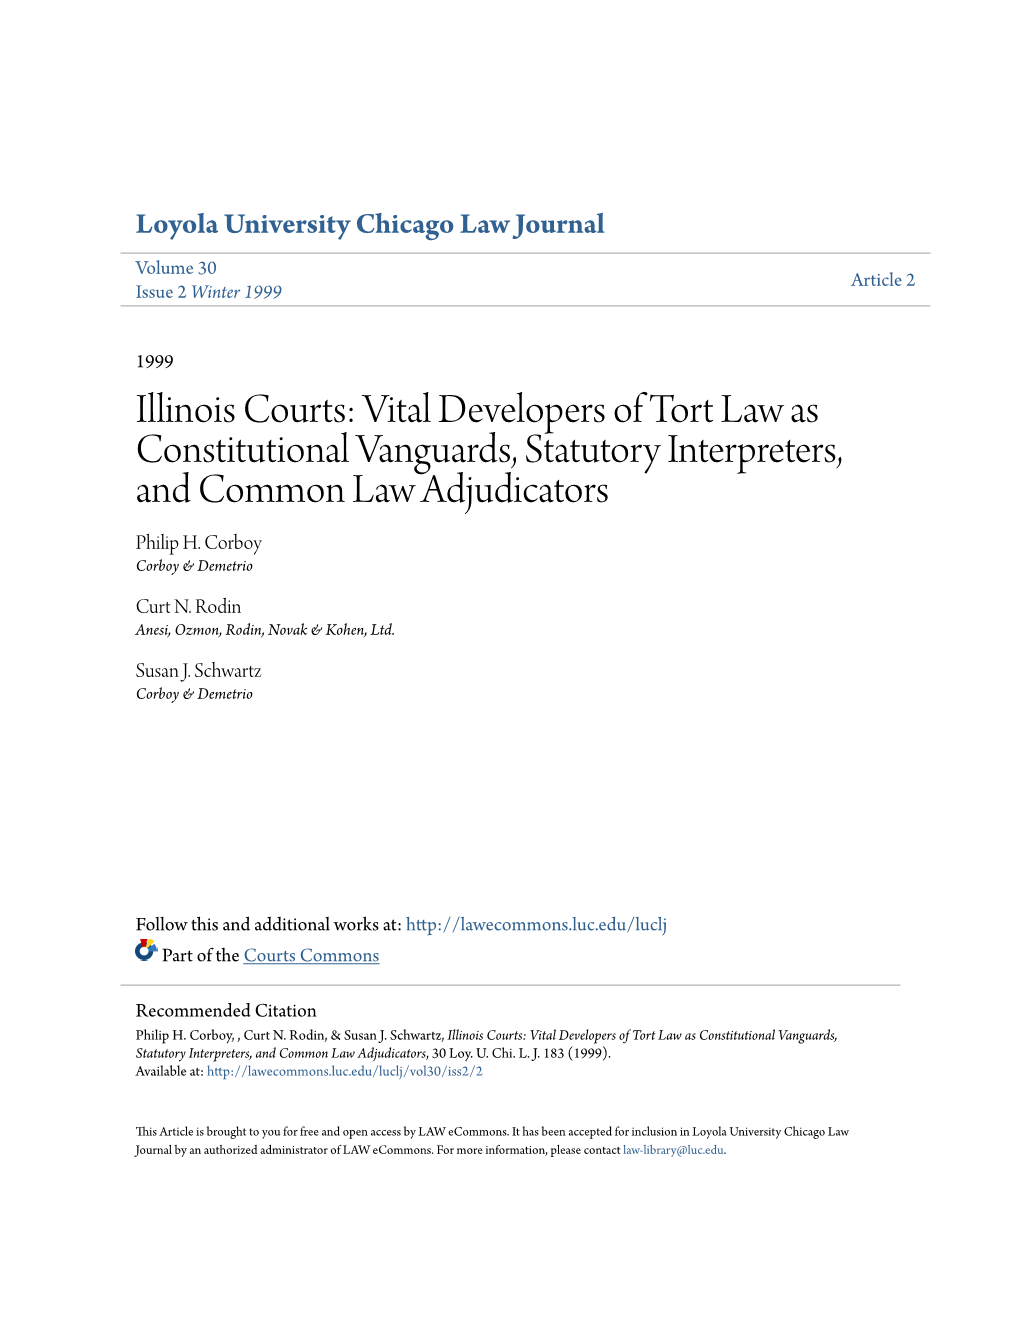 Illinois Courts: Vital Developers of Tort Law As Constitutional Vanguards, Statutory Interpreters, and Common Law Adjudicators Philip H